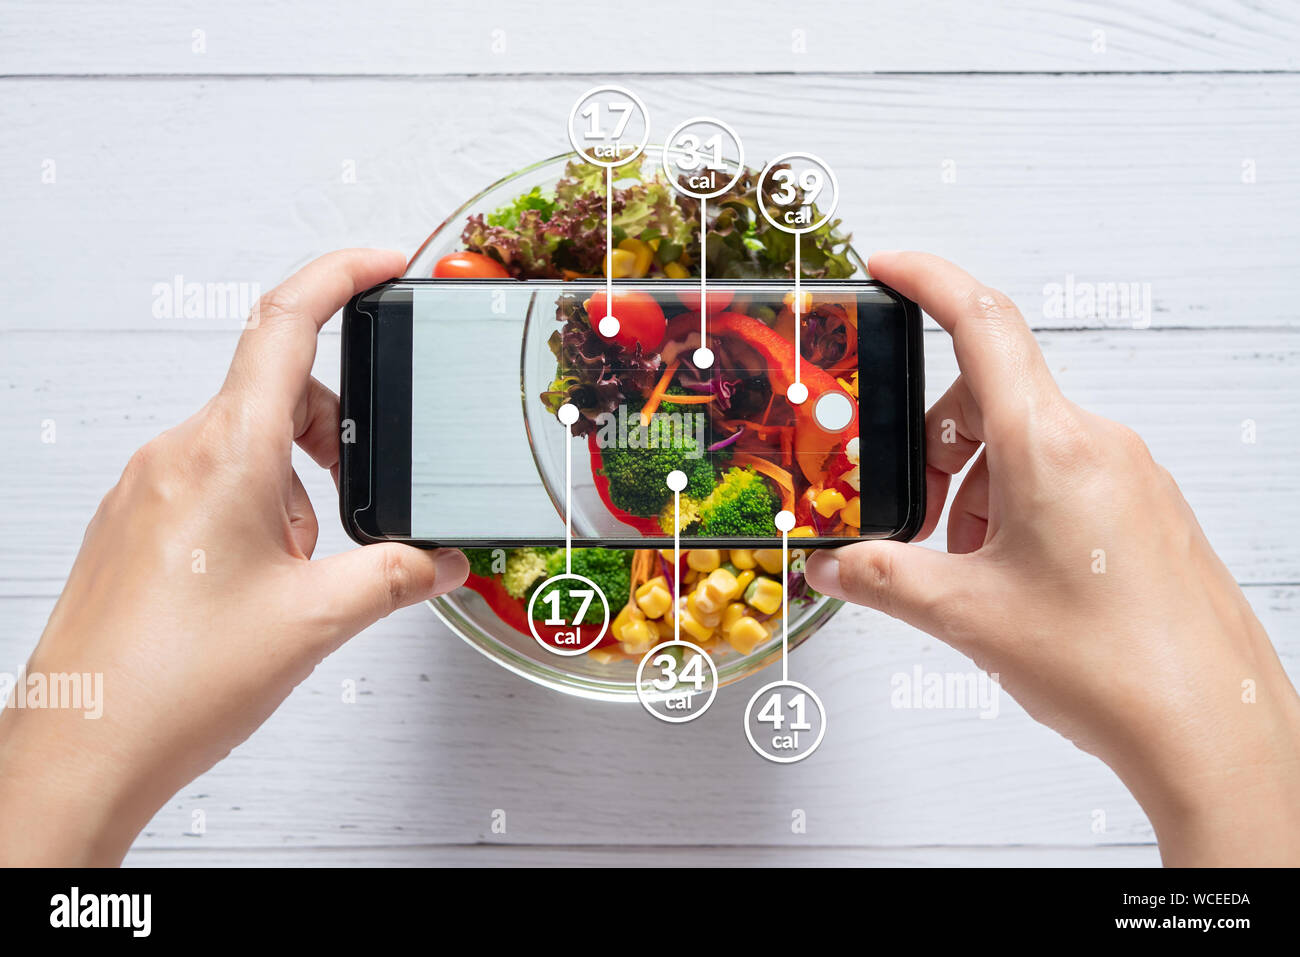 Calories counting and food control concept. woman using application on smartphone for scanning the amount of calories in the food before eat Stock Photo